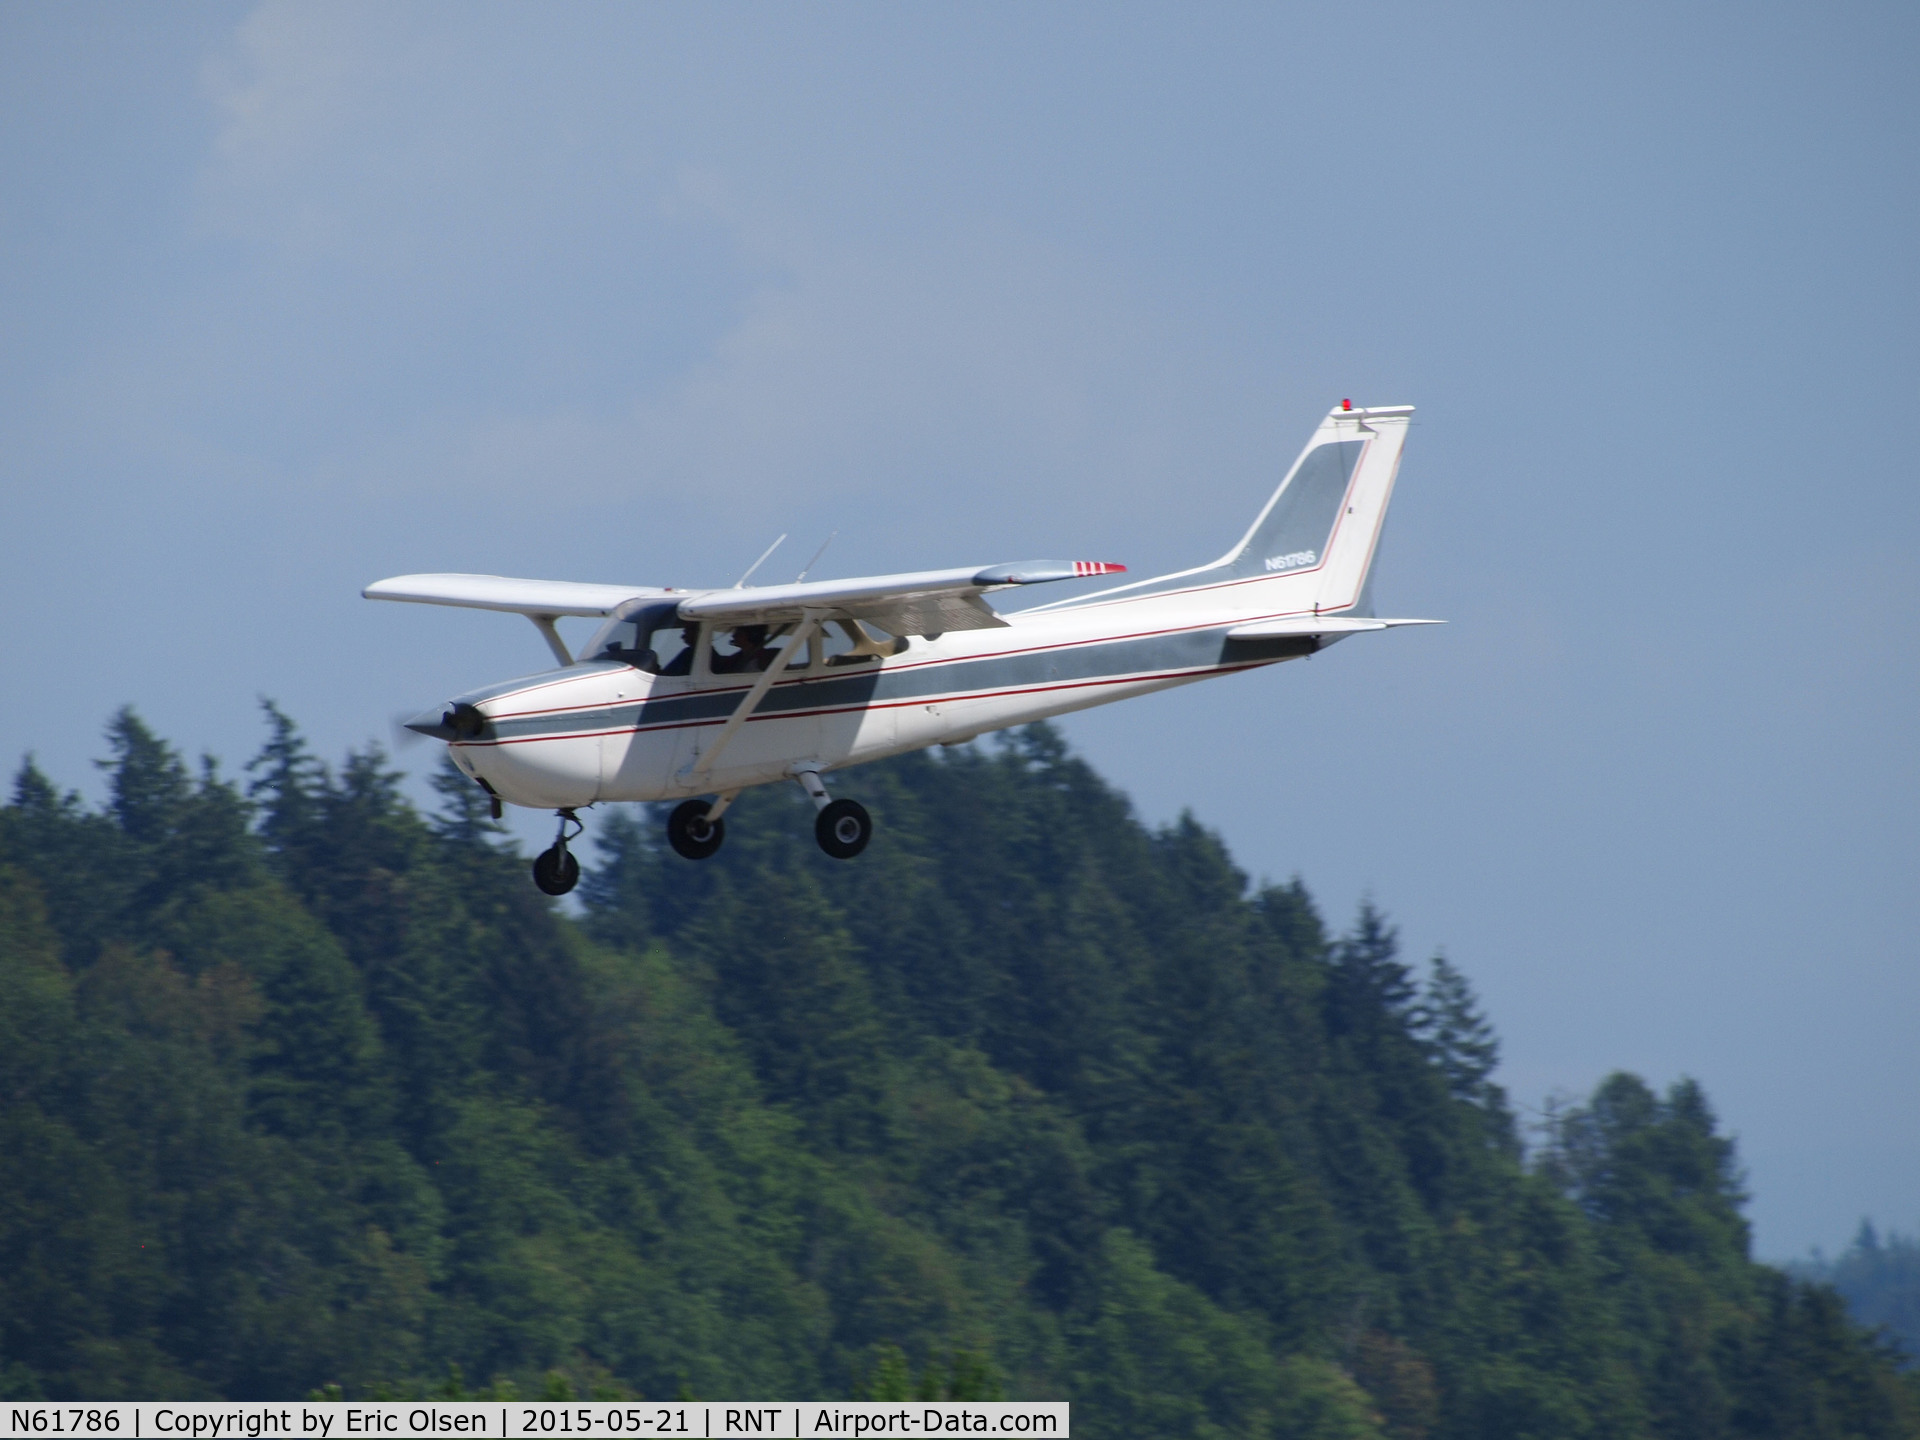 N61786, 1975 Cessna 172M C/N 17264800, 1975 Cessna 172M coming into RNT.